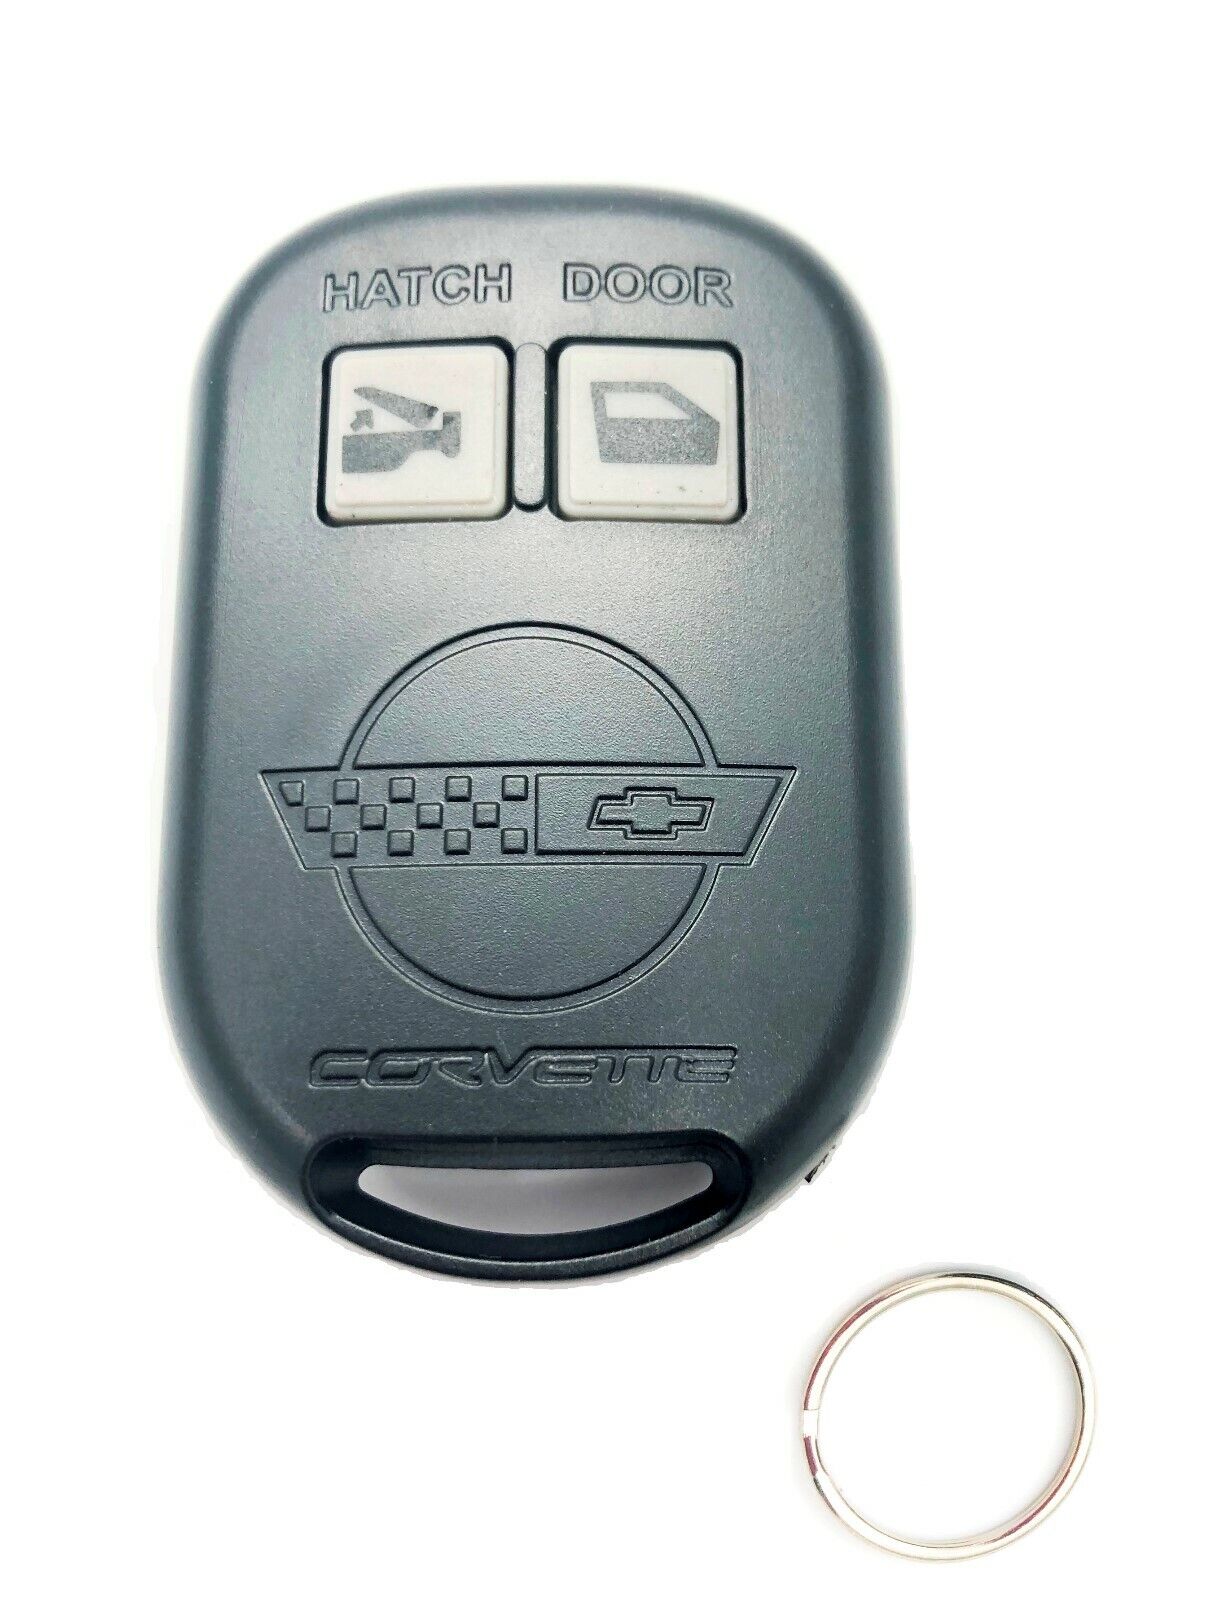 New Keyless Remote FOB Screw EMPTY CASE ONLY Fits 1993-1996 Chevy Corvette C4